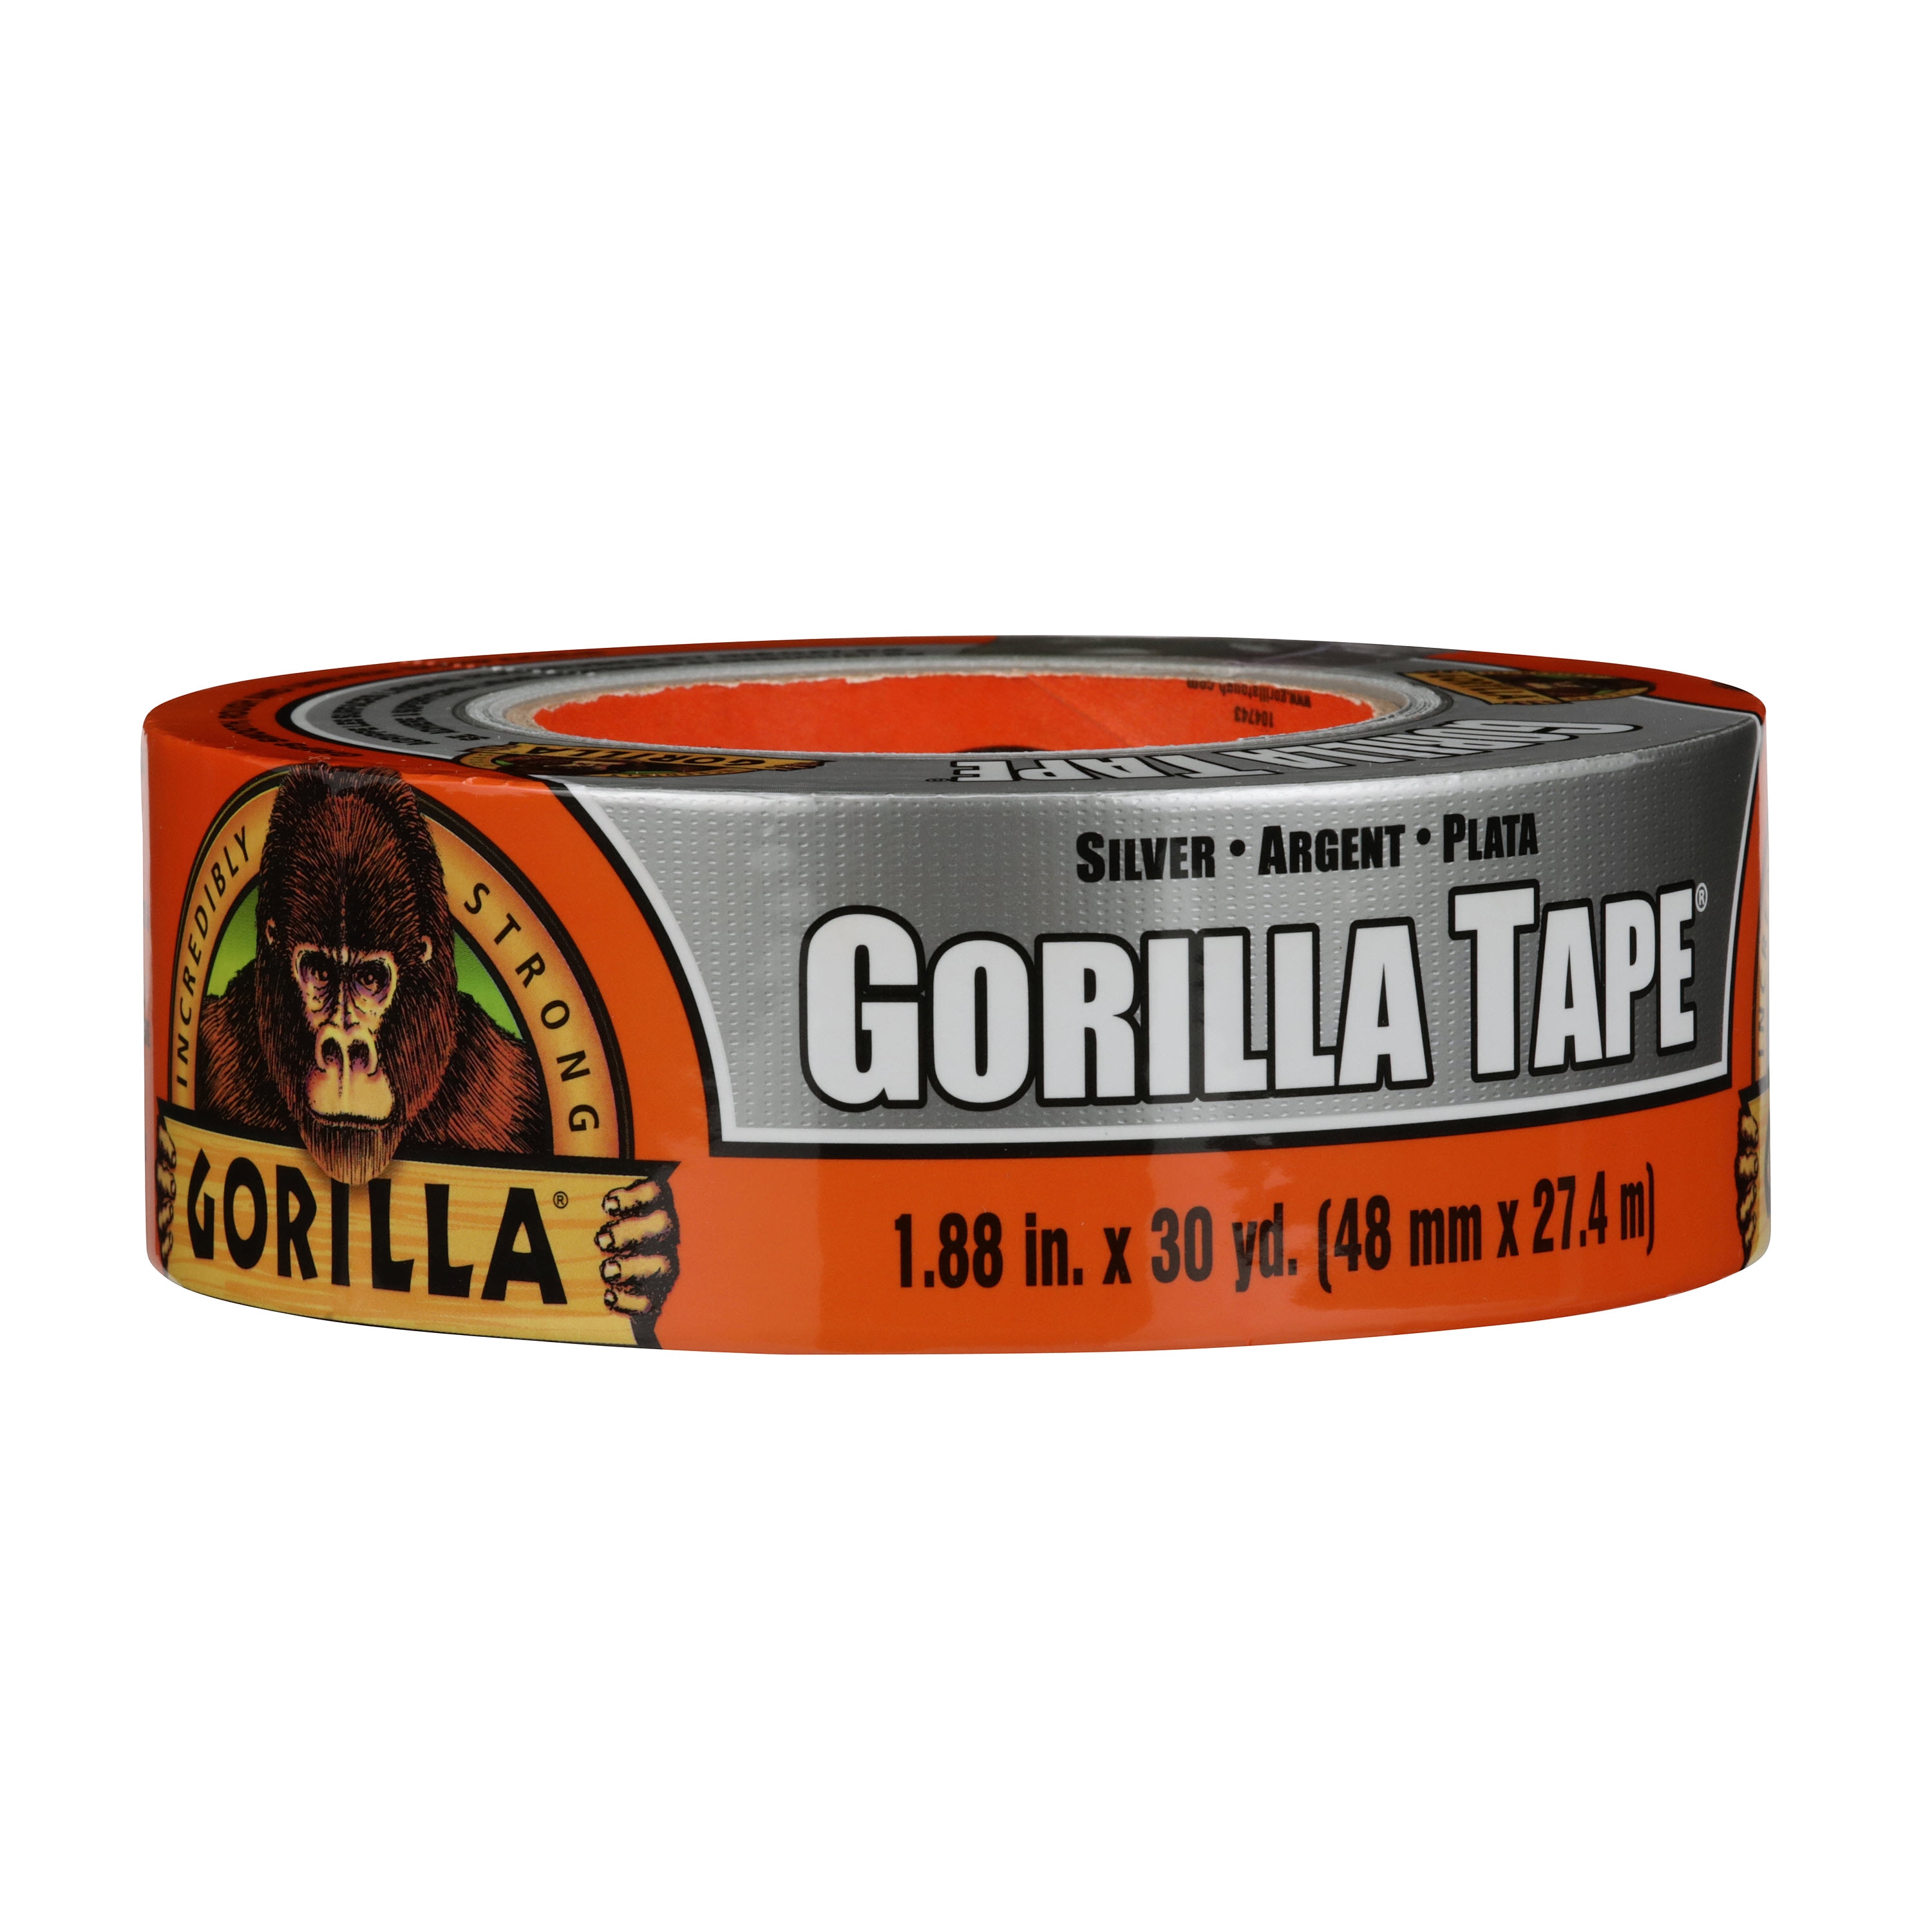 Gorilla Tape Silver, 1.88" x 12 yd Pack of 1 Pack of 1 Silver Duct Tape 